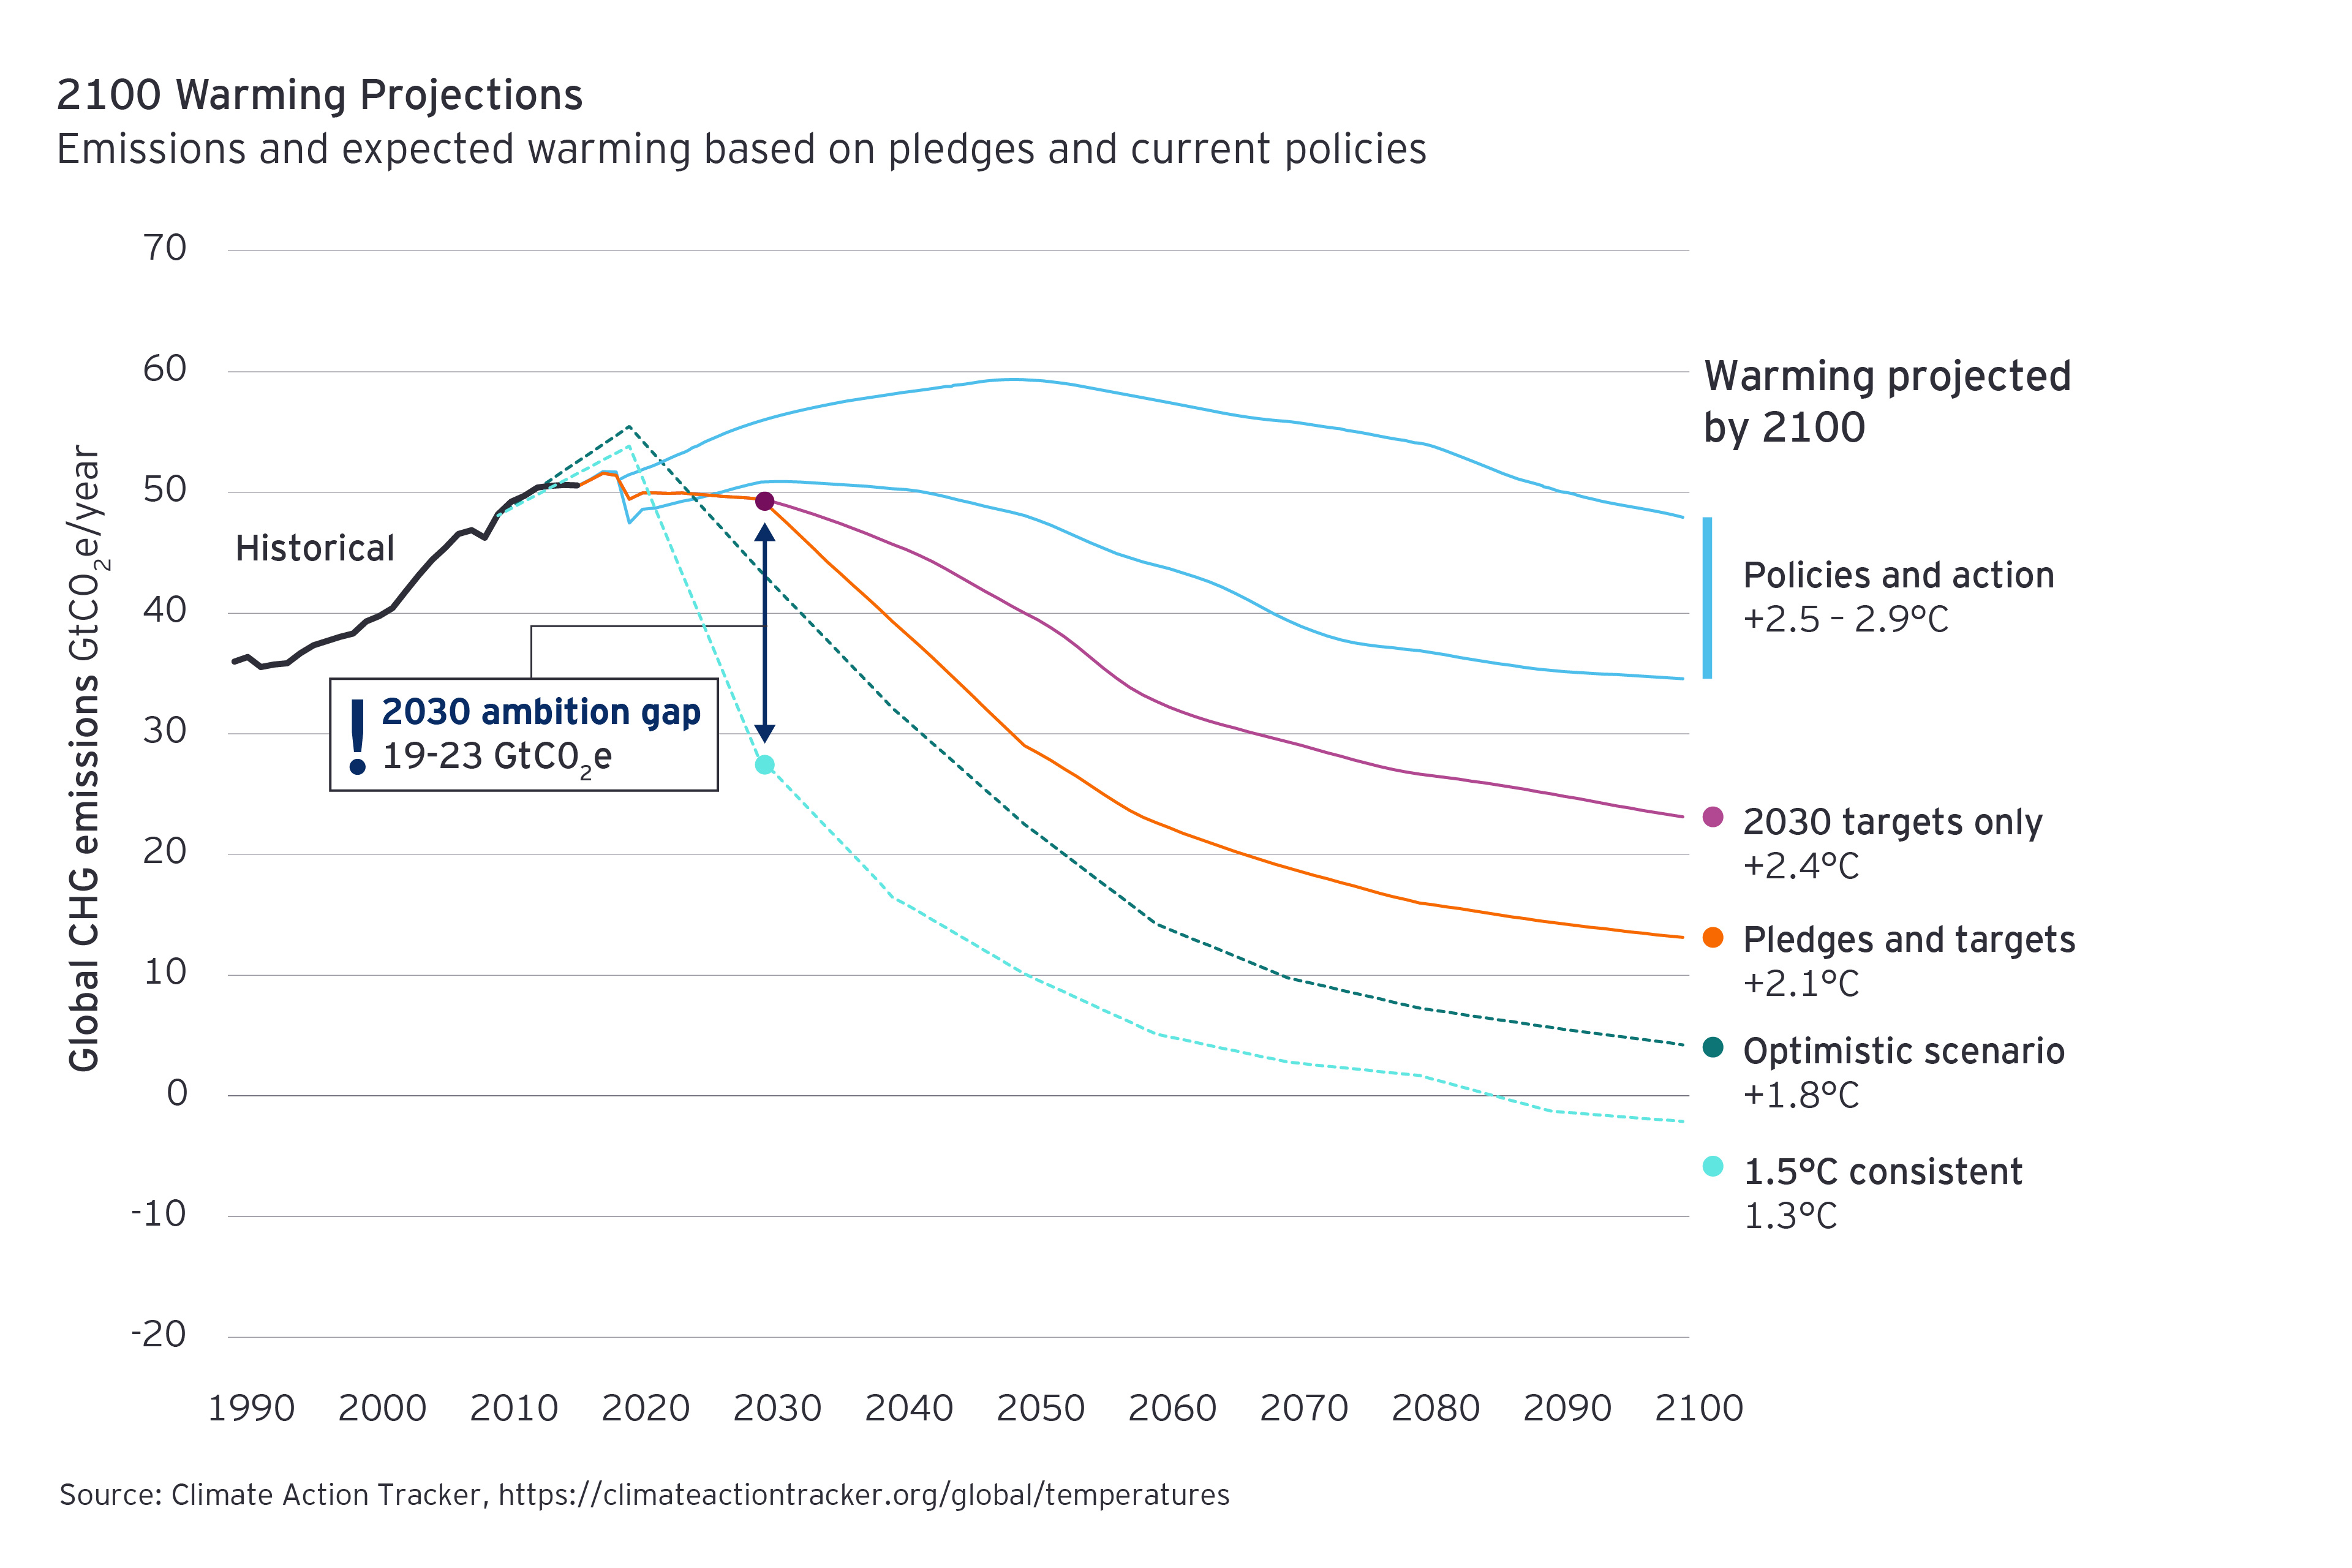 Chart showing year 2100 warming projections